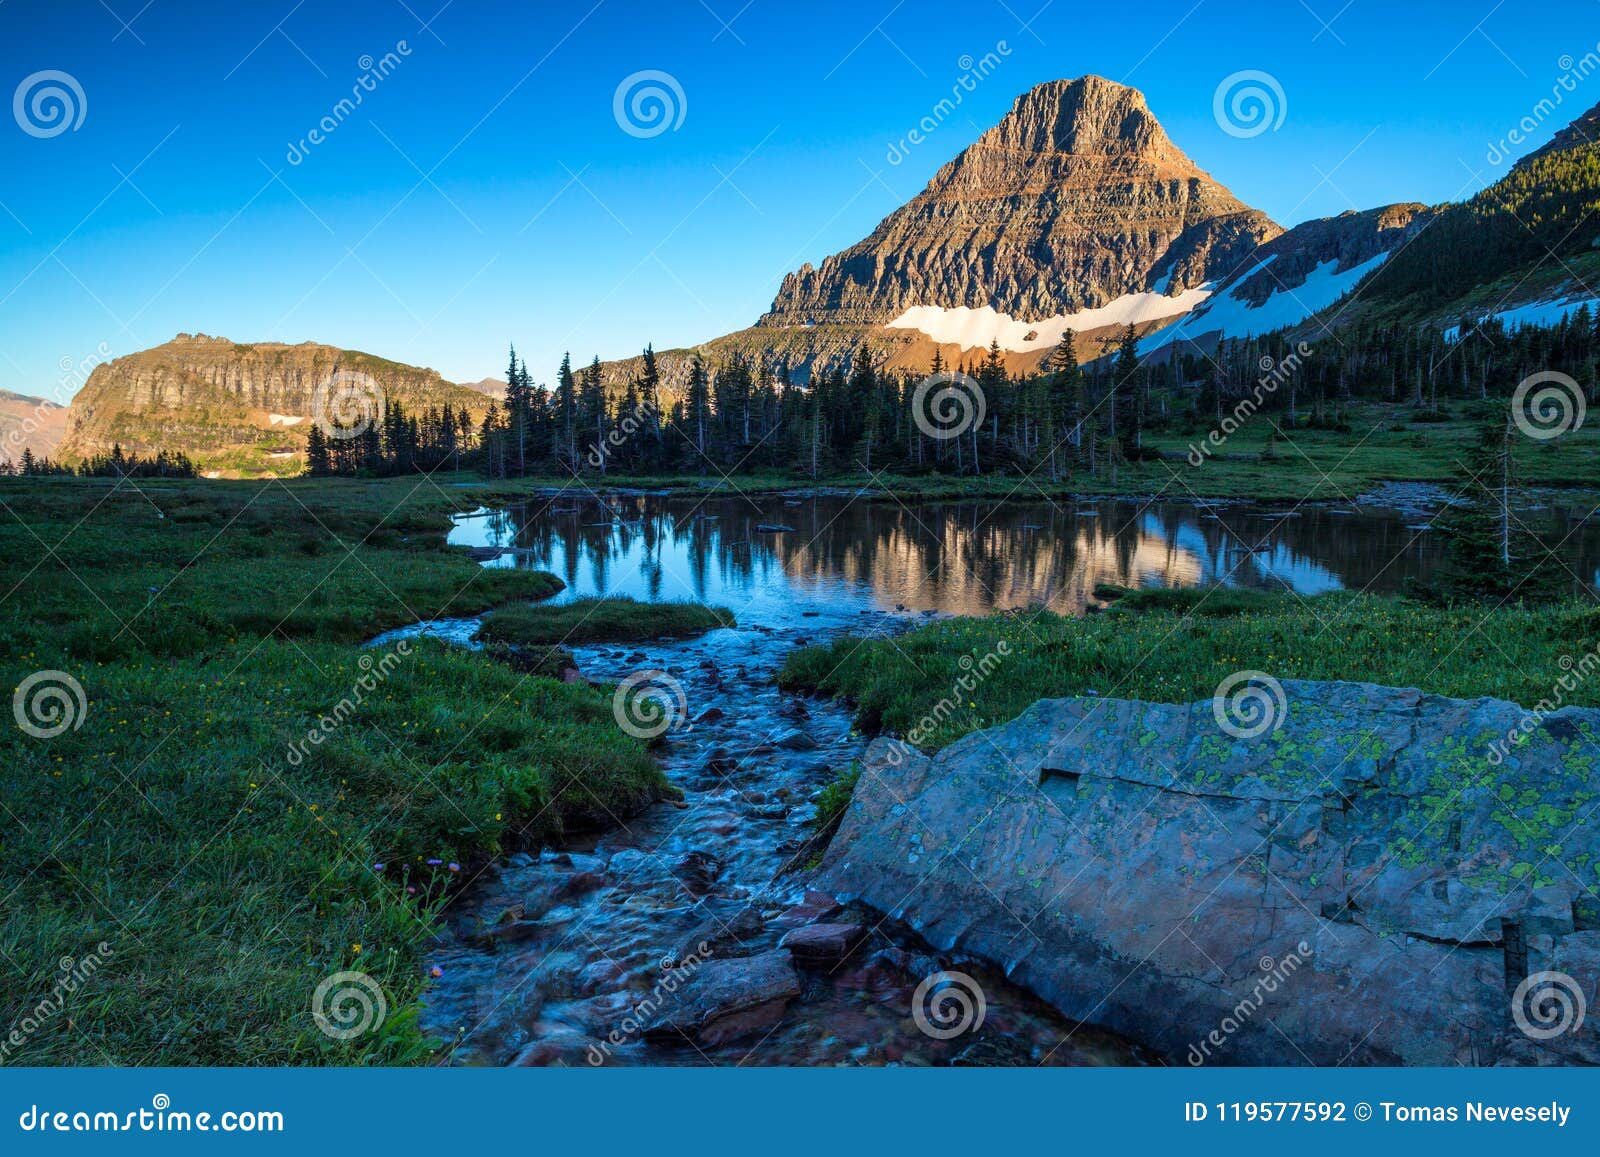 reynolds mountain in the logan pass area of glacier national park, montana